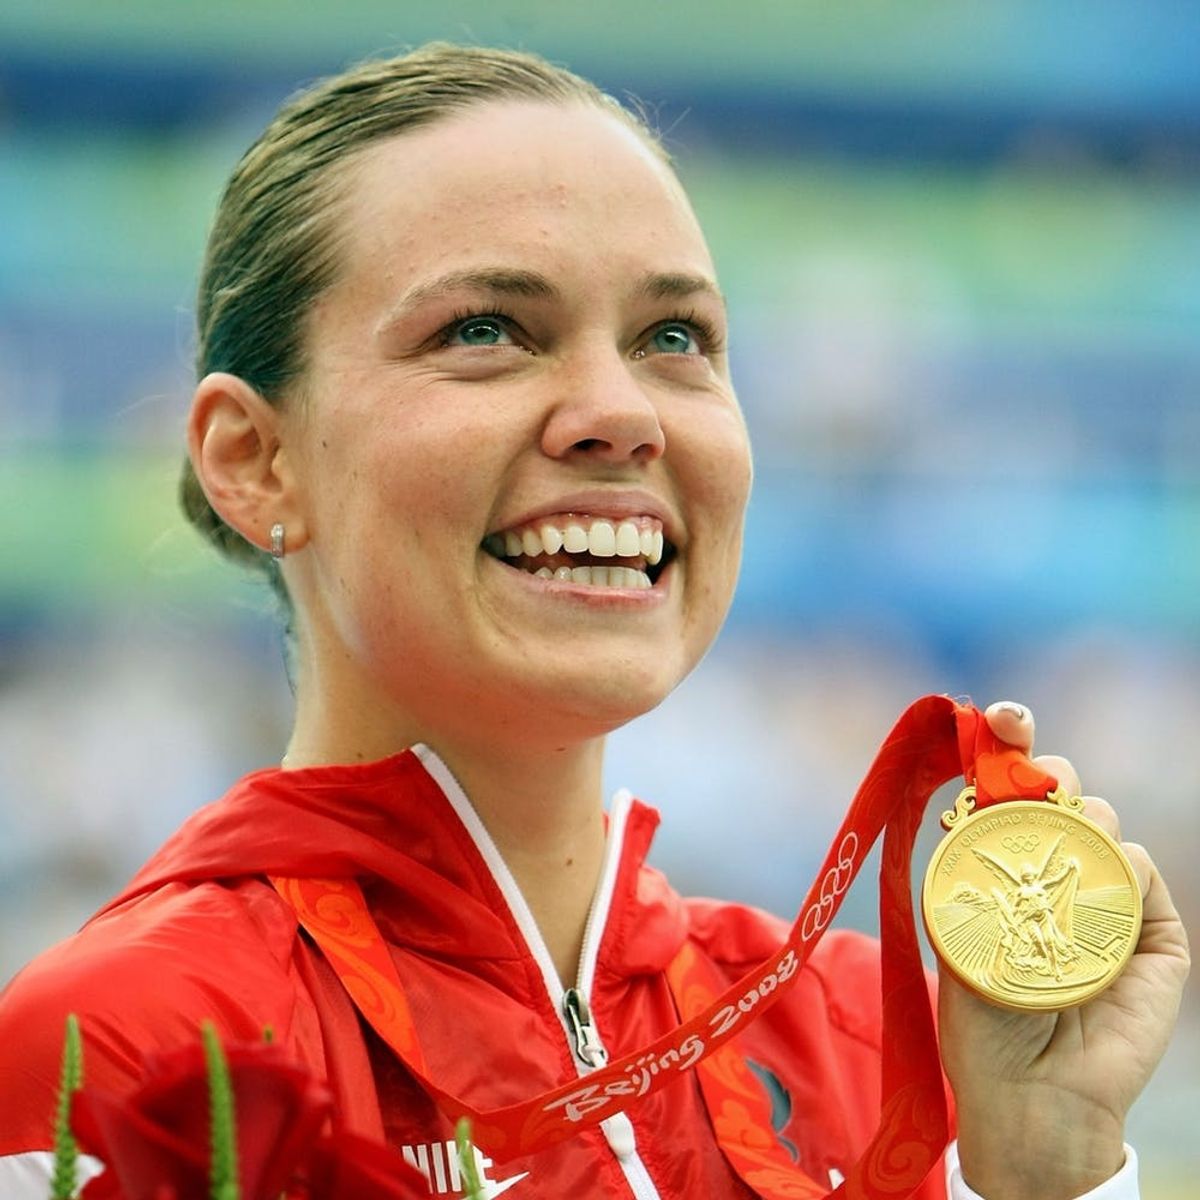 How to Work Out, Eat Right and Stay Motivated Like an Olympian